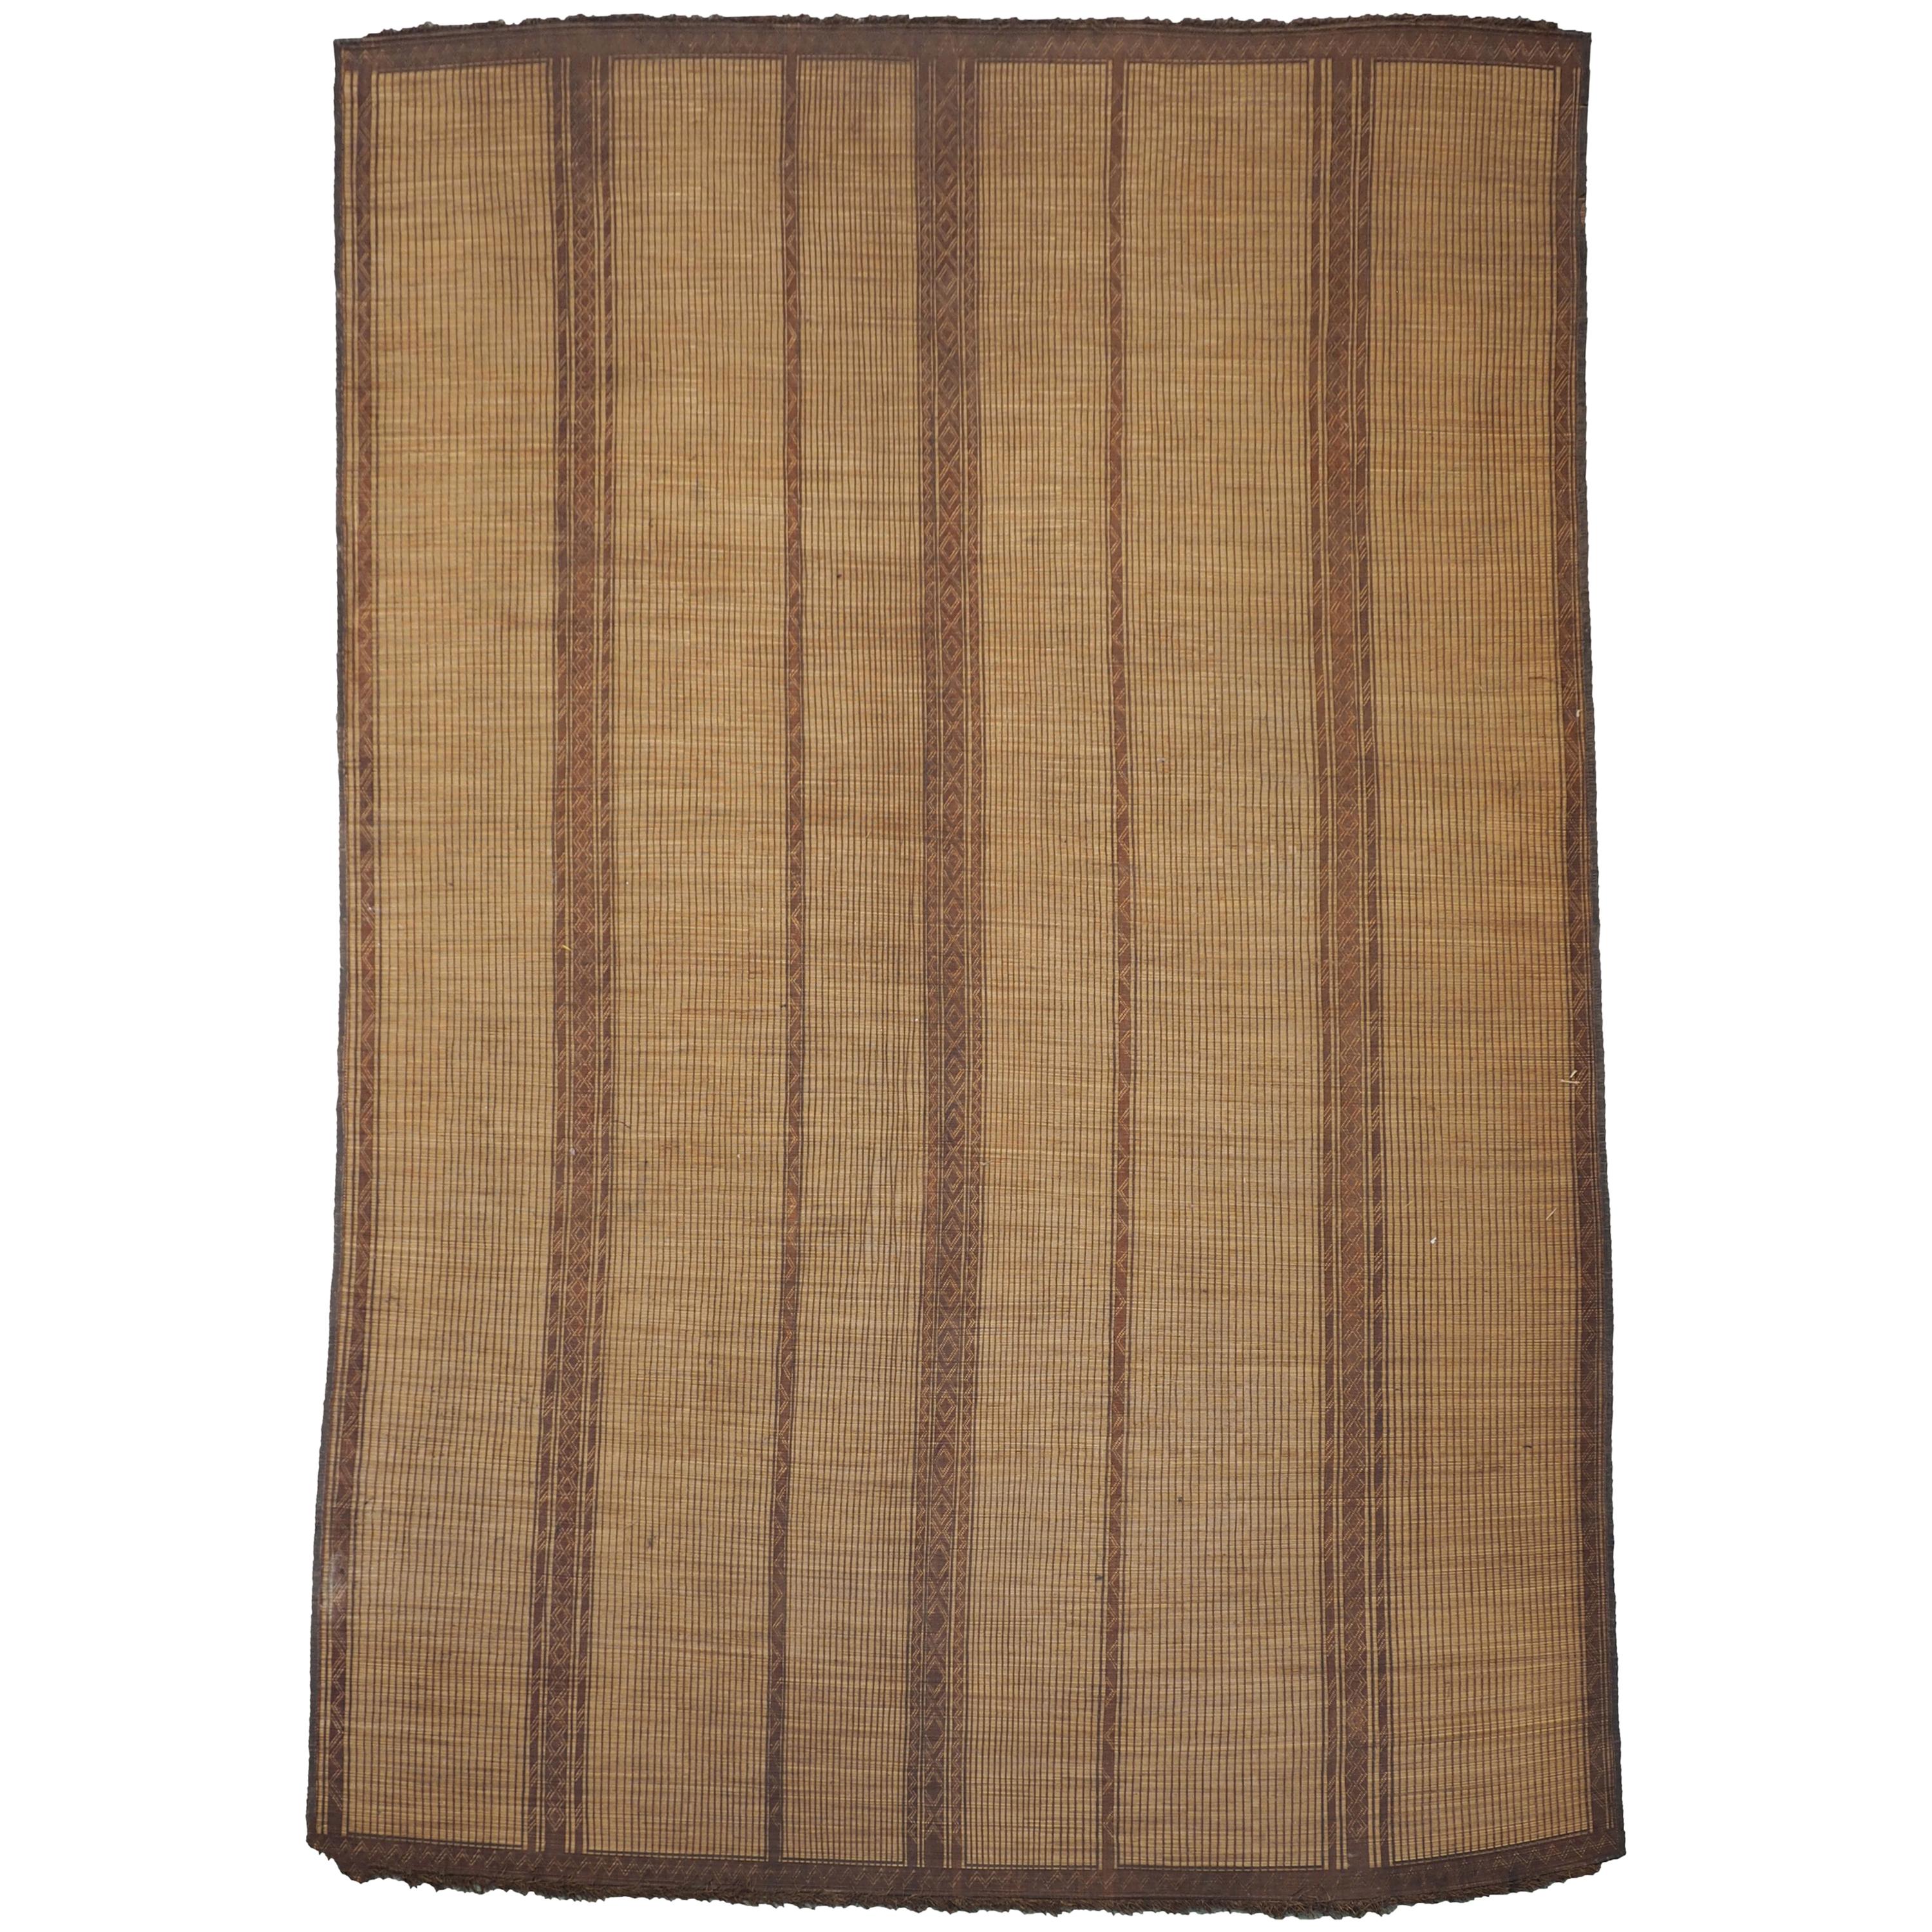 Mauritania Mat from Sahara in Leather and Palm Wood, Mid-Century Modern Design For Sale